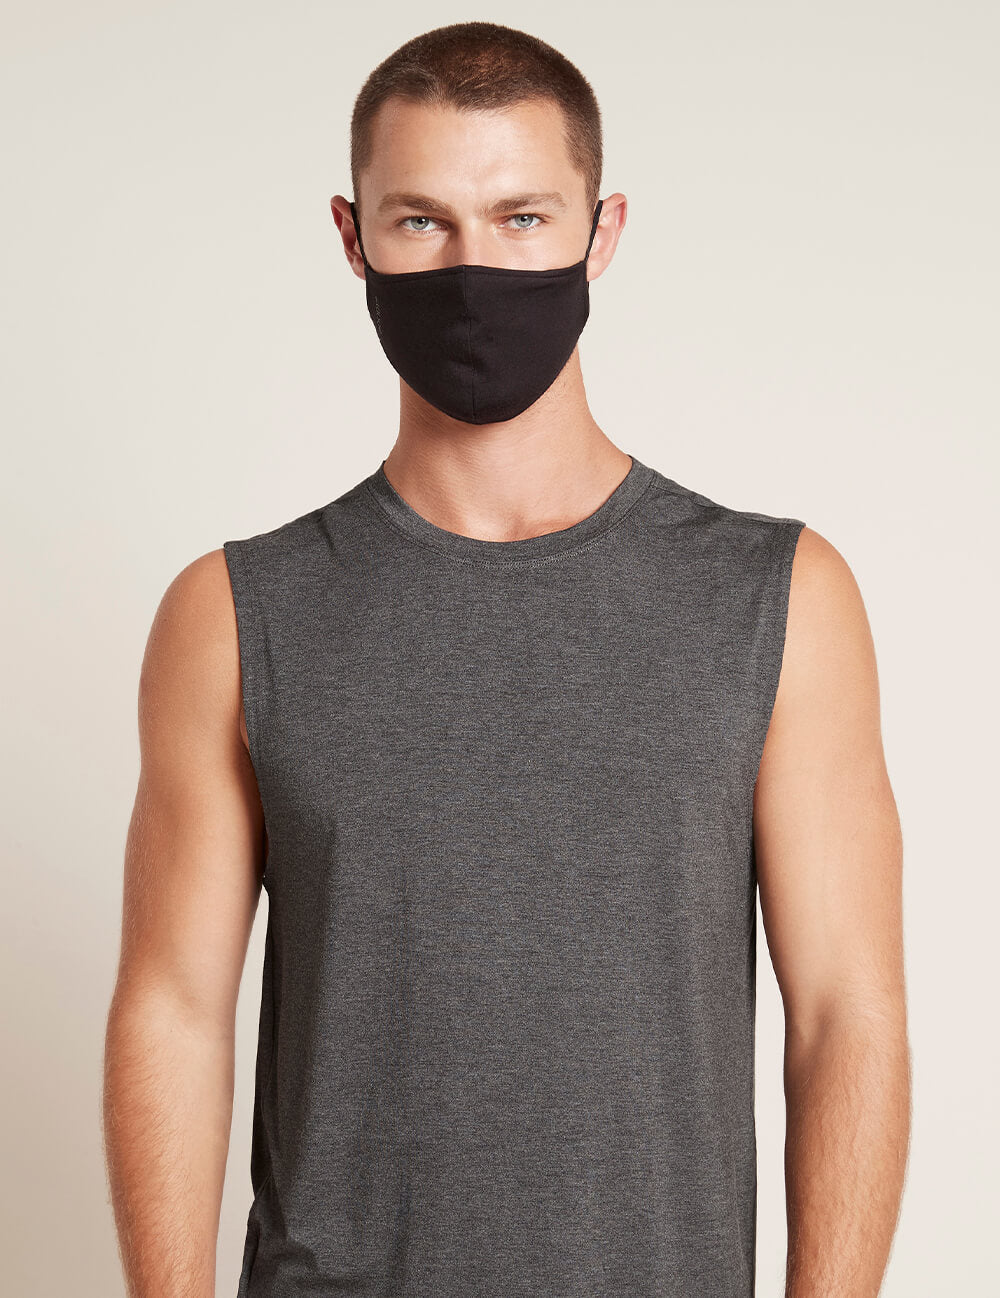 SoftTouch-Mask_black-front.jpg